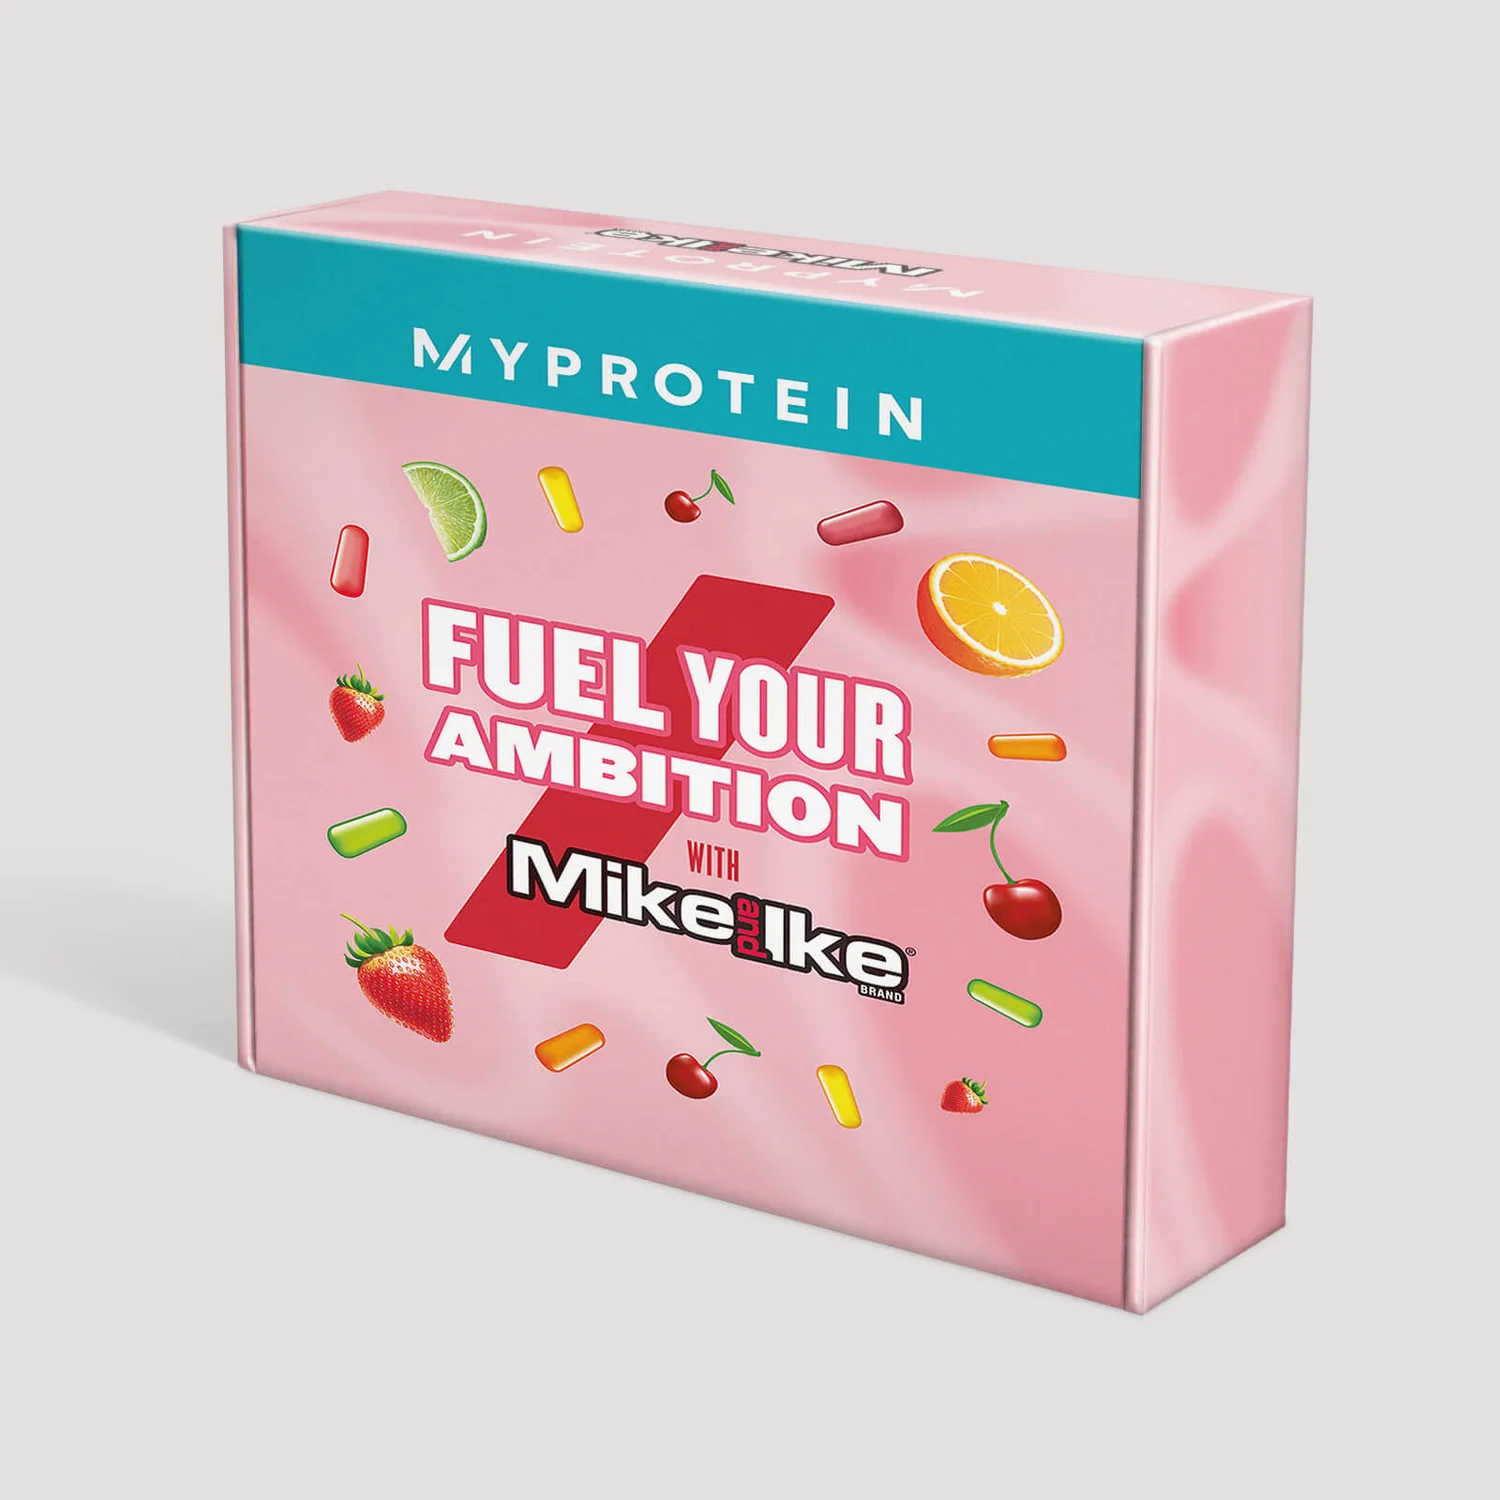 Myprotein x MIKE AND IKE® Sample Box (Strawberry)
					
					| MYPROTEIN™